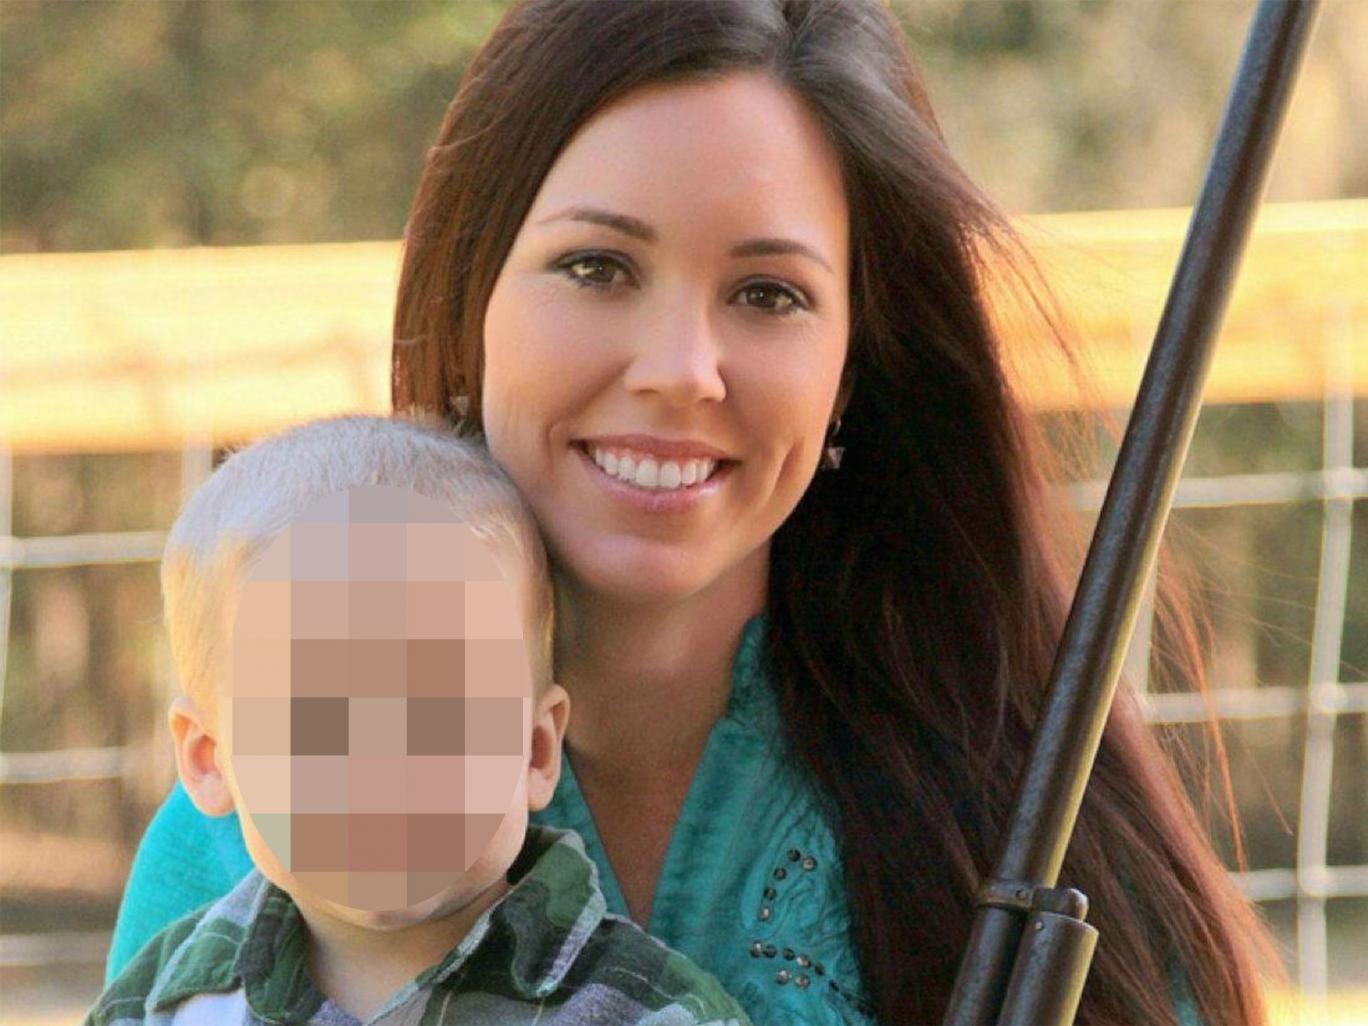 An affidavit has been filed with local prosecutors charging Jamie Gilt with allowing a child to access a gun